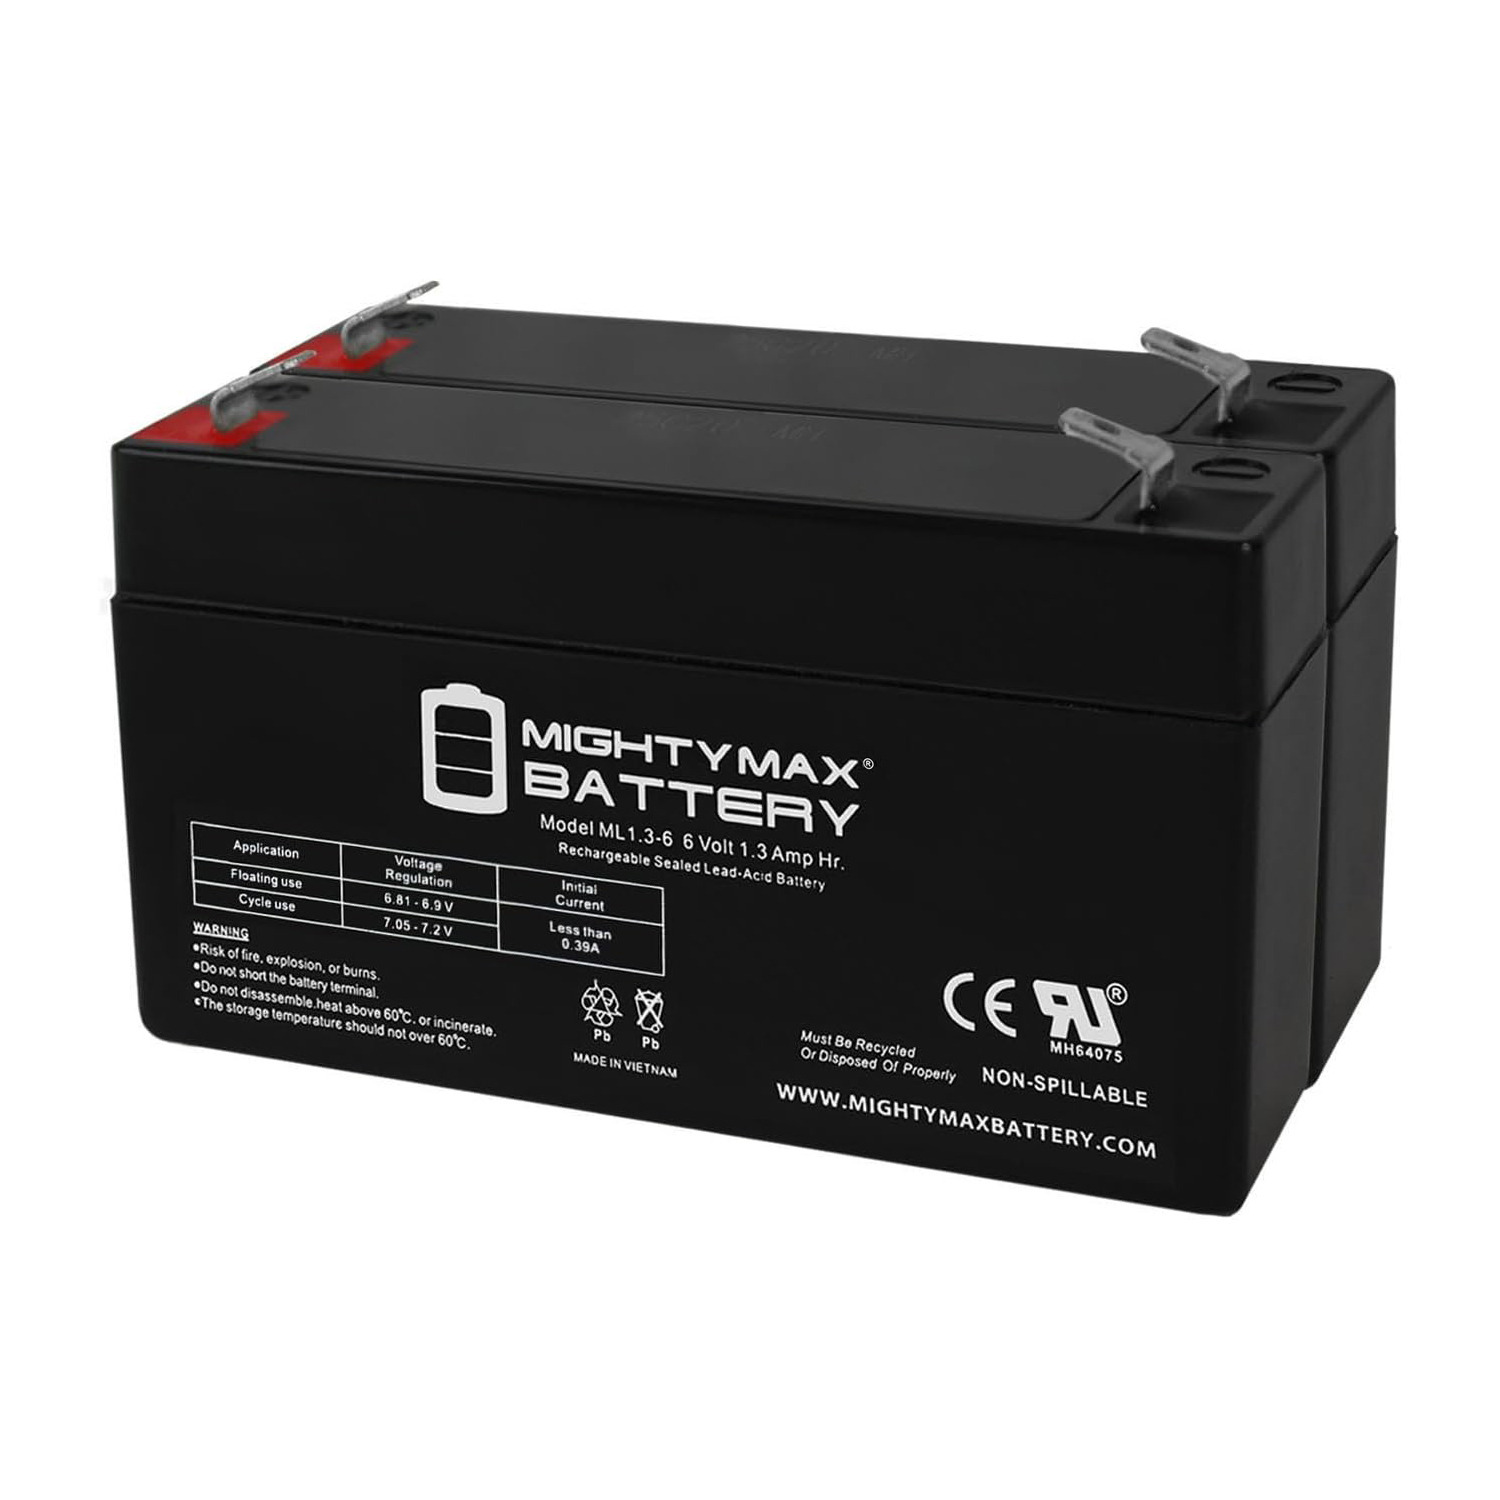 6V 1.3Ah SLA Replacement Battery for Exell D5731 - 2 Pack